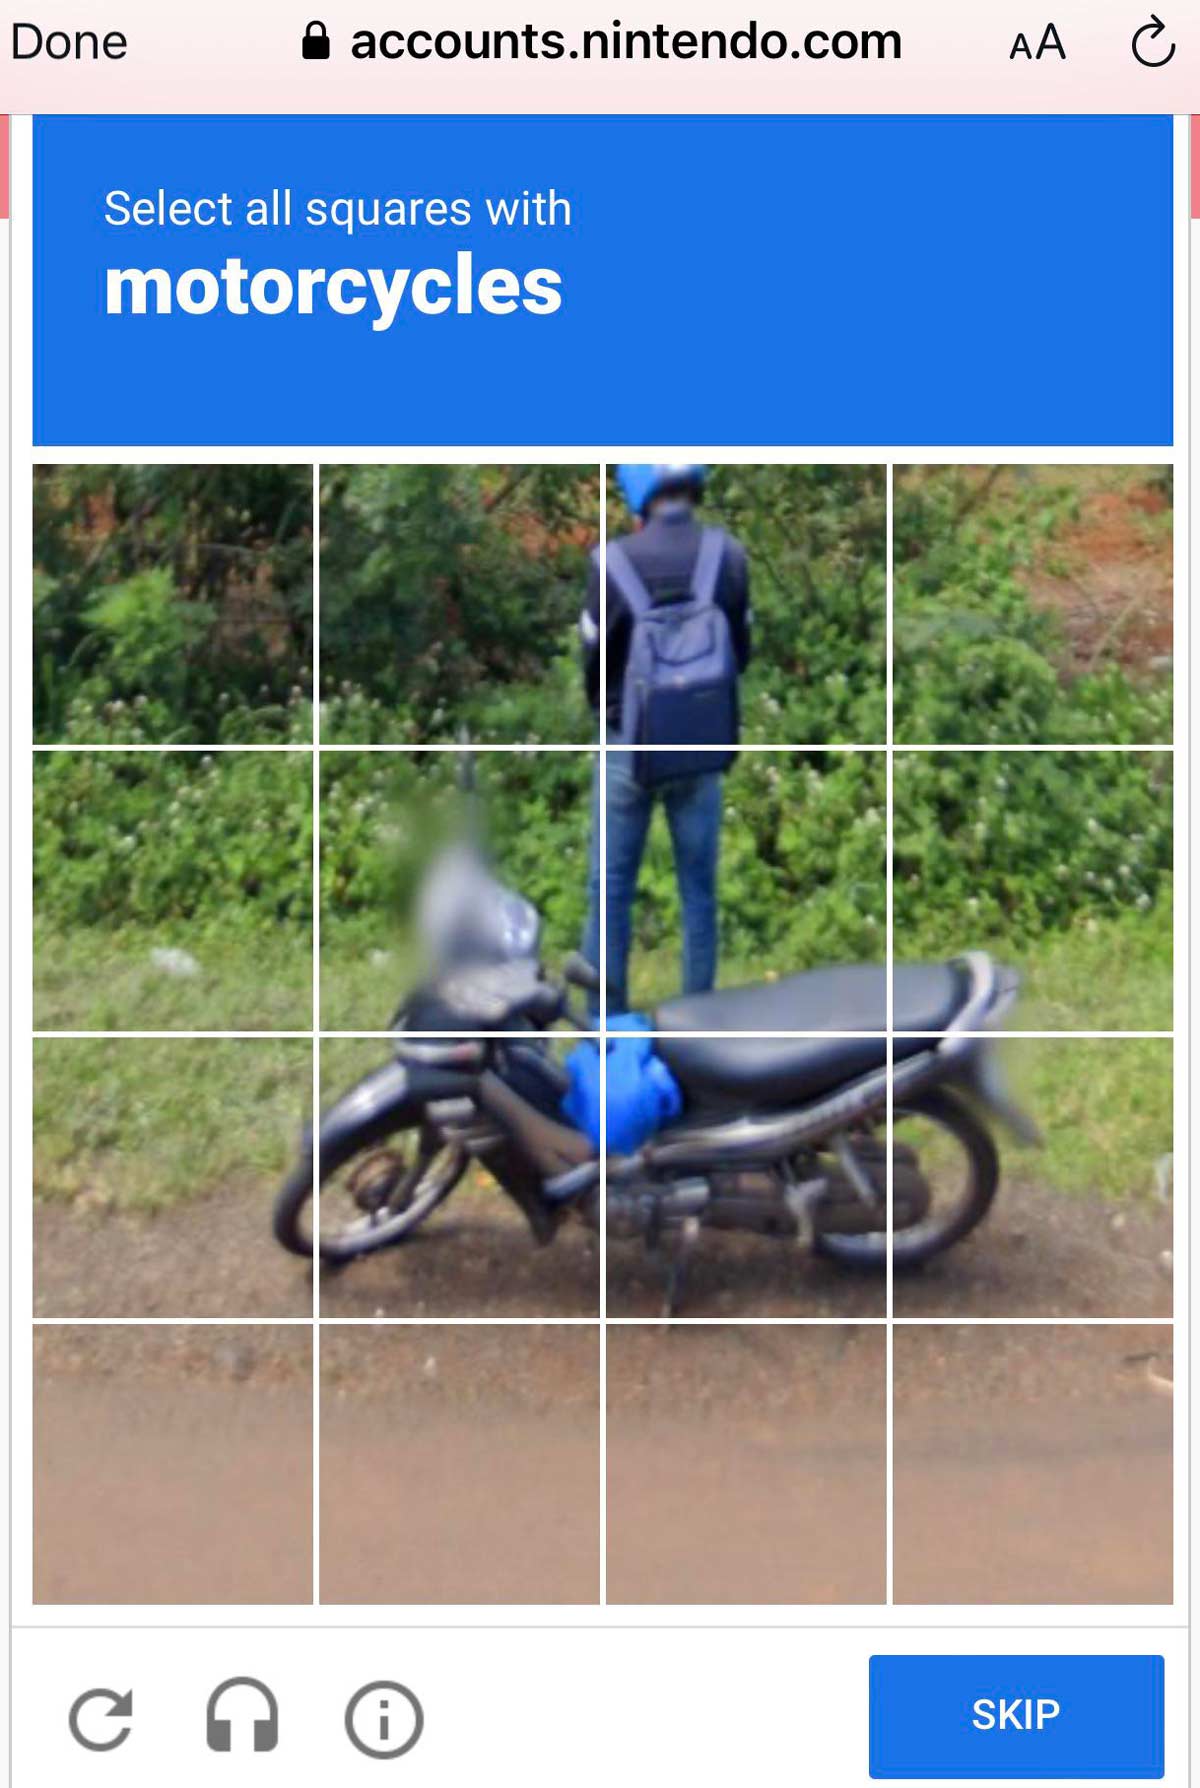 The Nintendo Captcha System gave me an image of a dude taking a leak